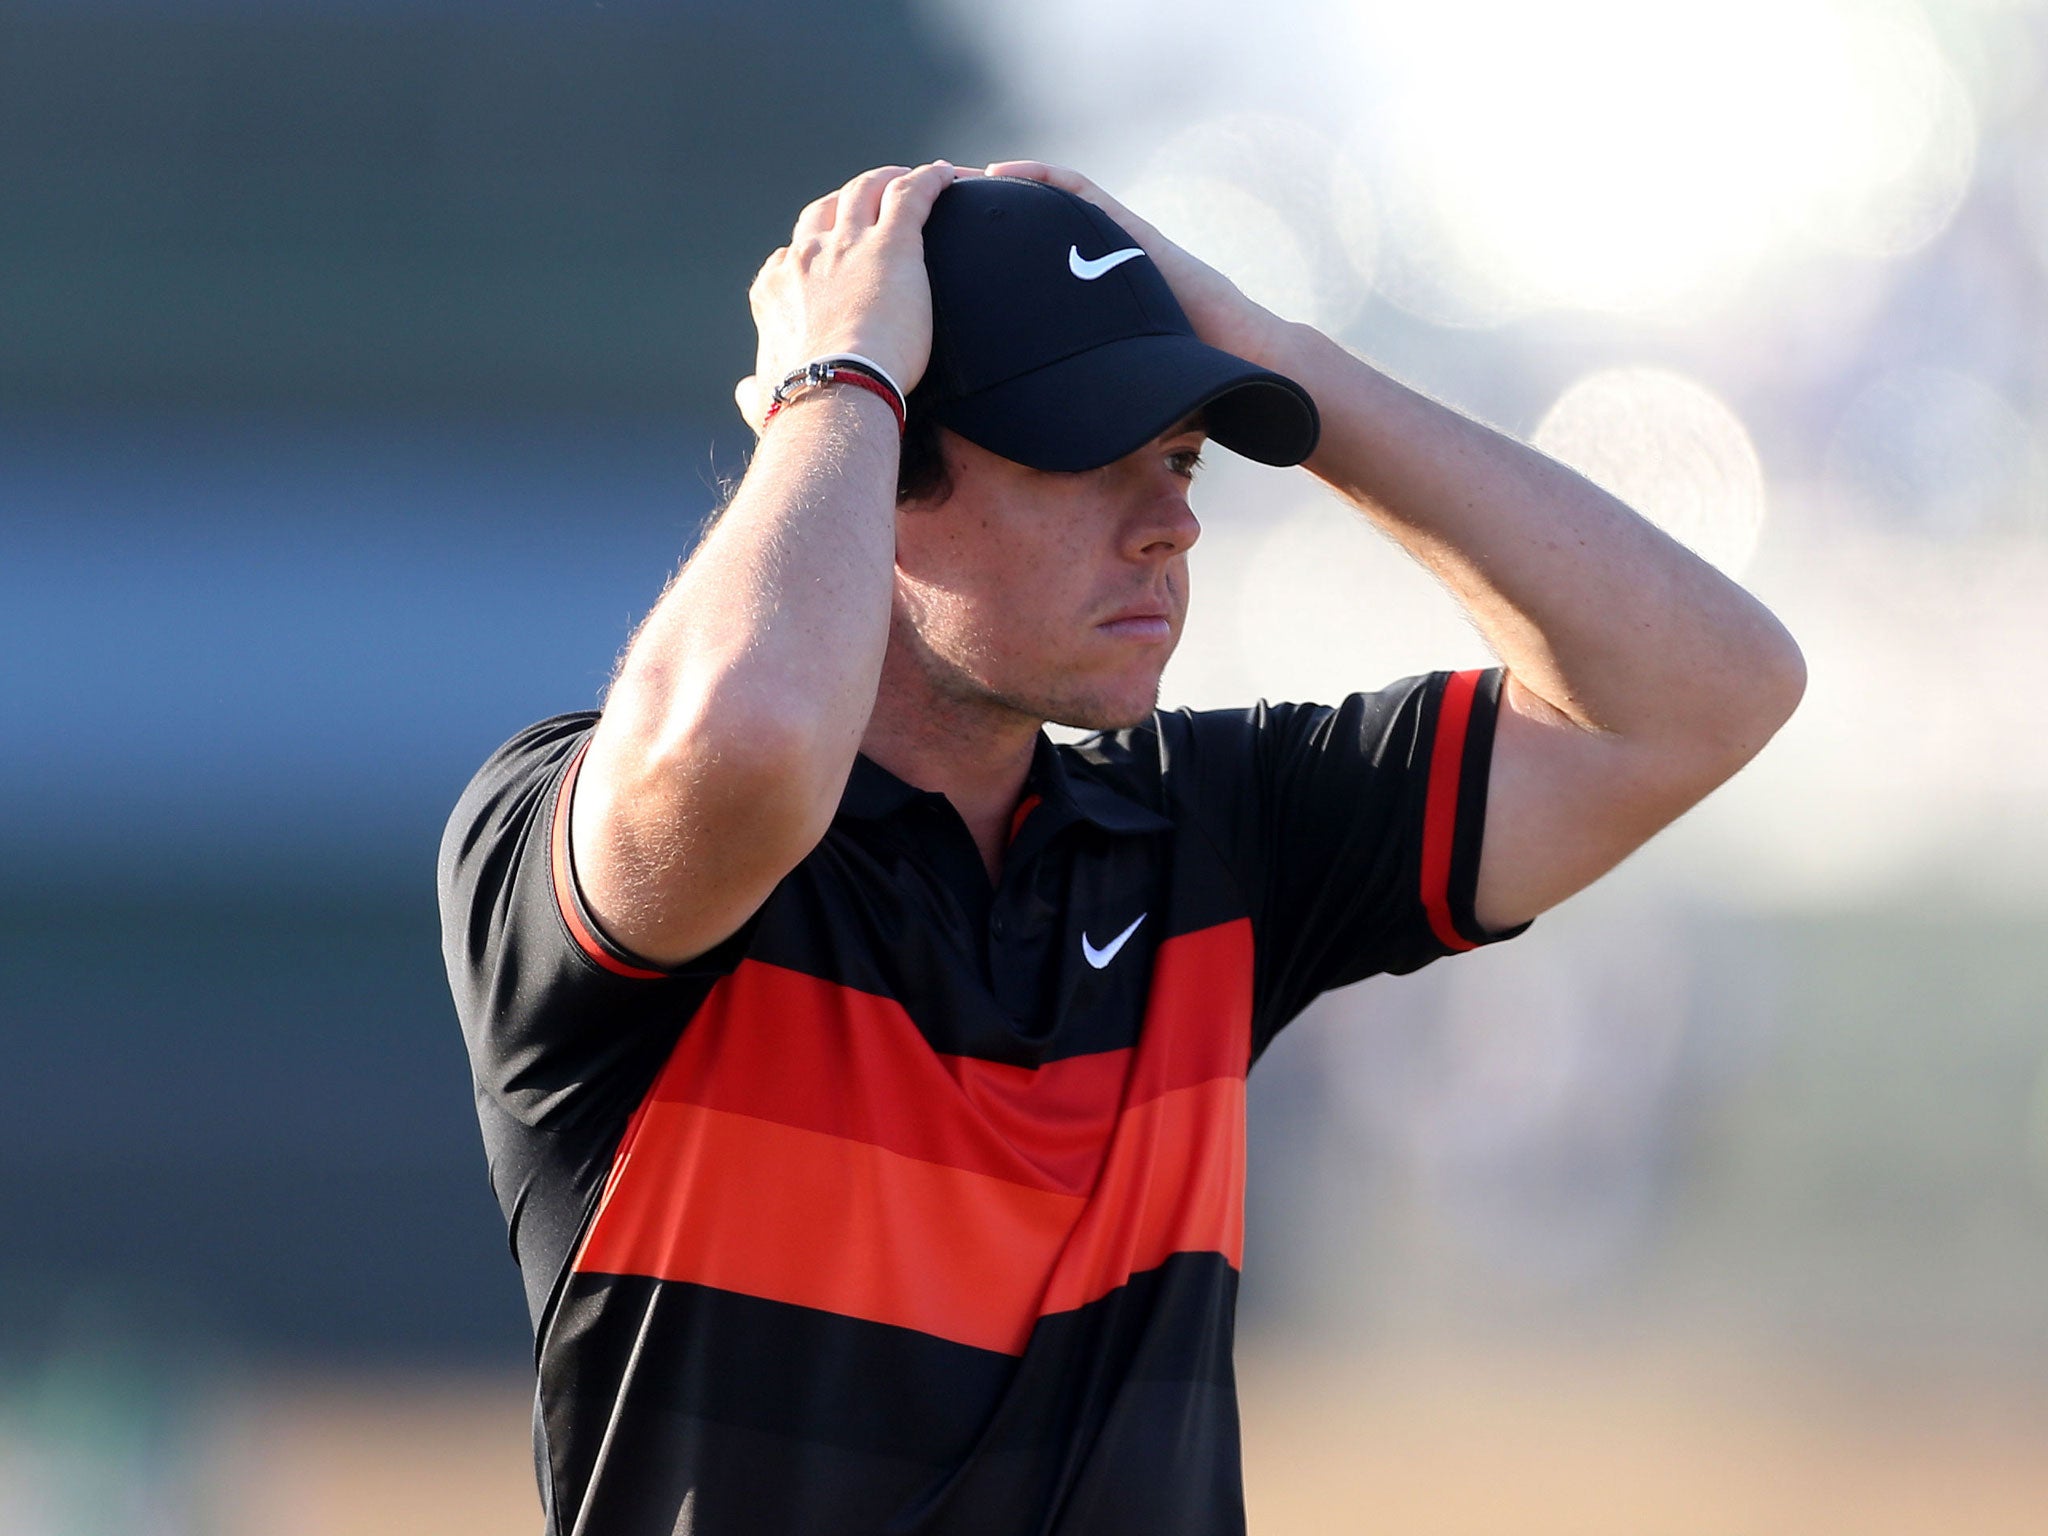 People have looked for the reason behind Rory McIlroy’s struggles